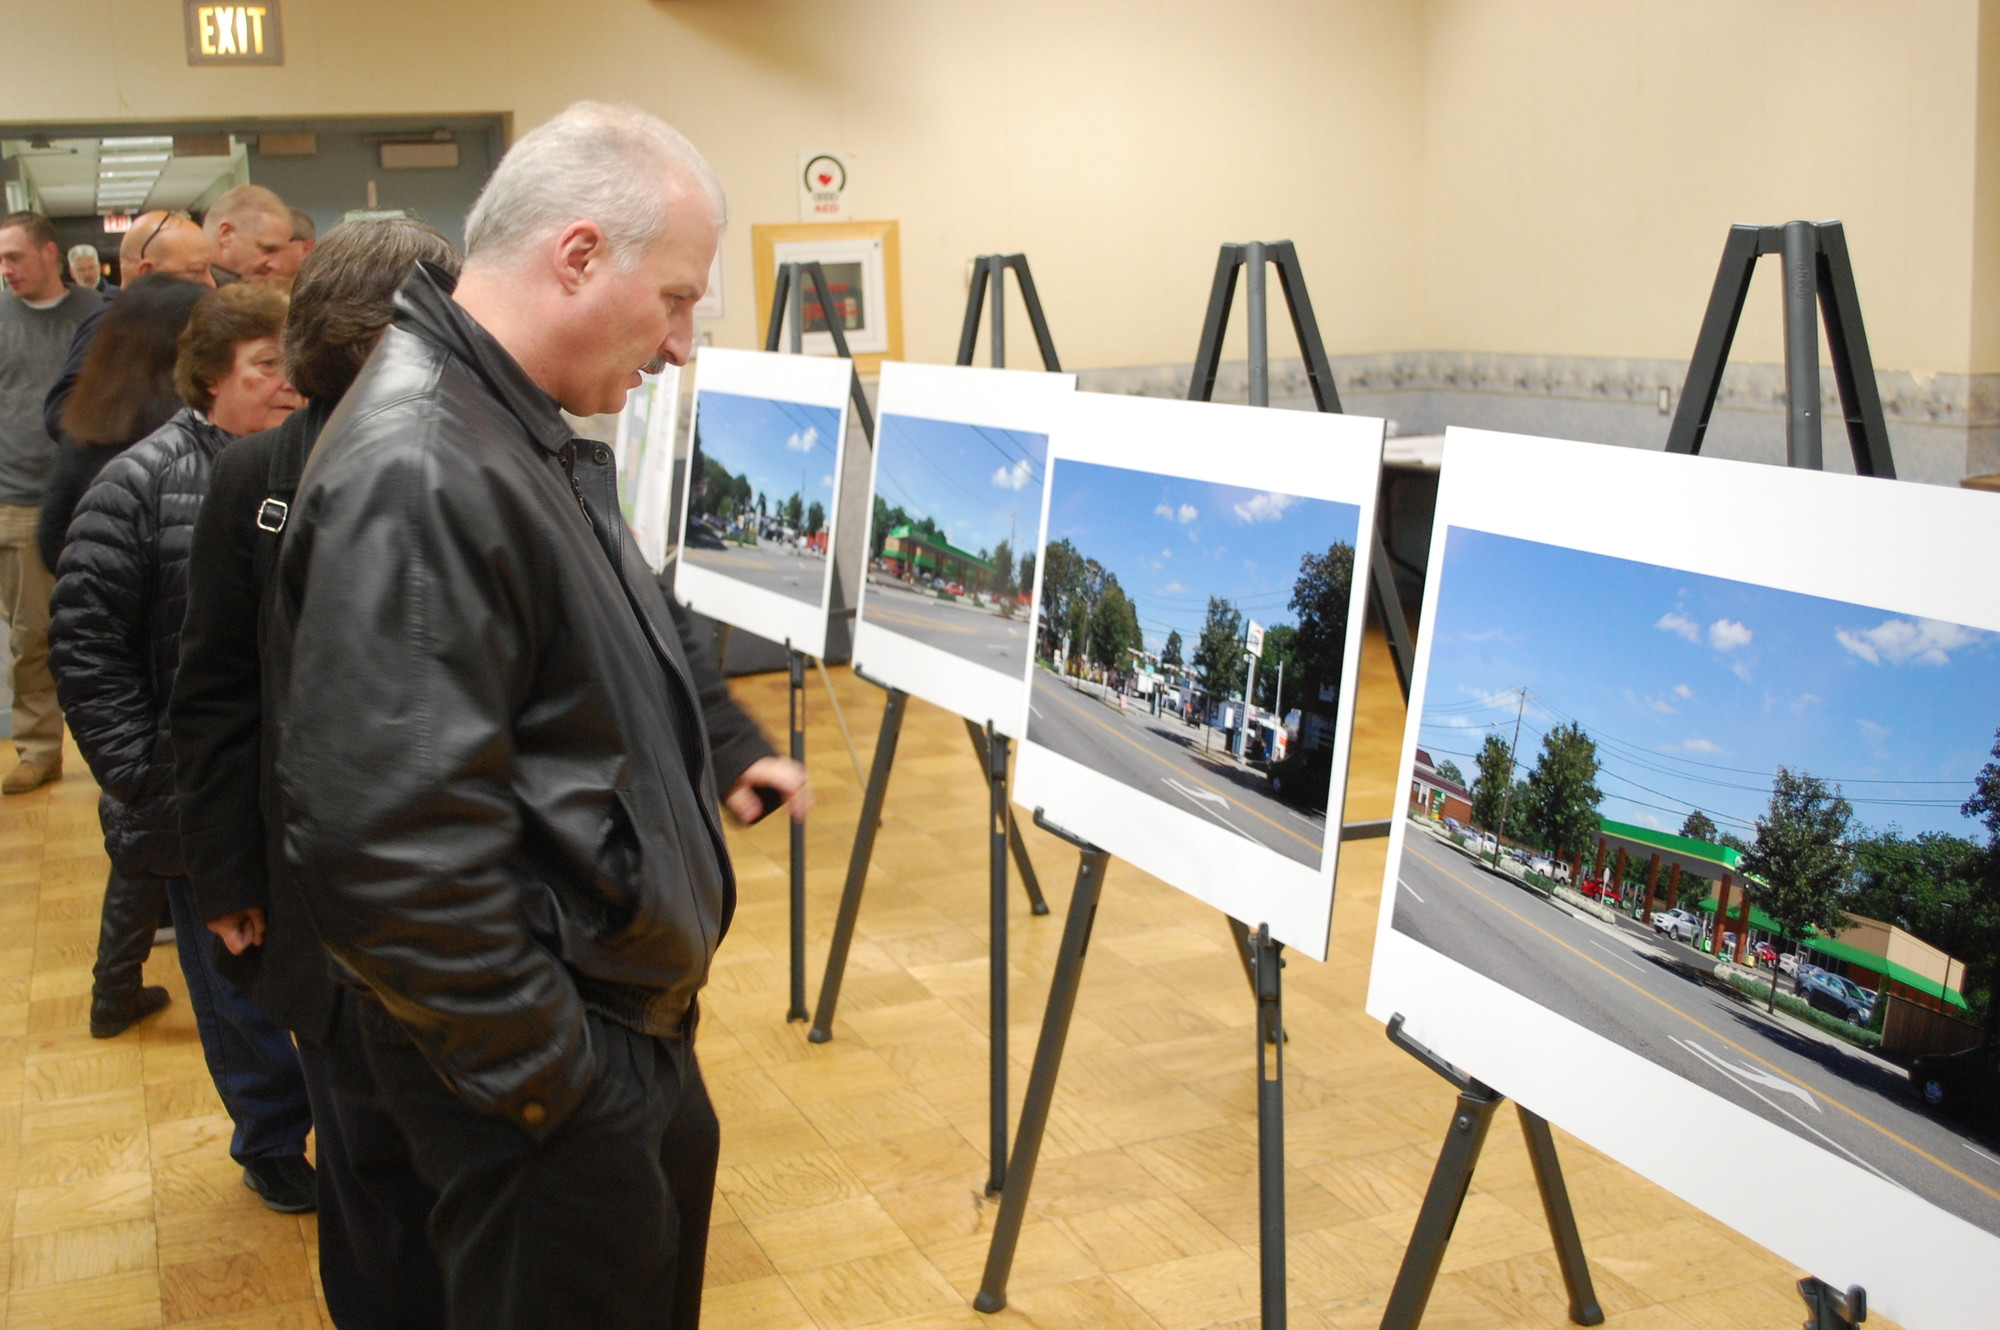 Seaford residents looked over pictures comparing the current Merrick Road site with renderings of the proposed QuickChek gas station at a community meeting on Jan. 13 at the Seaford firehouse.